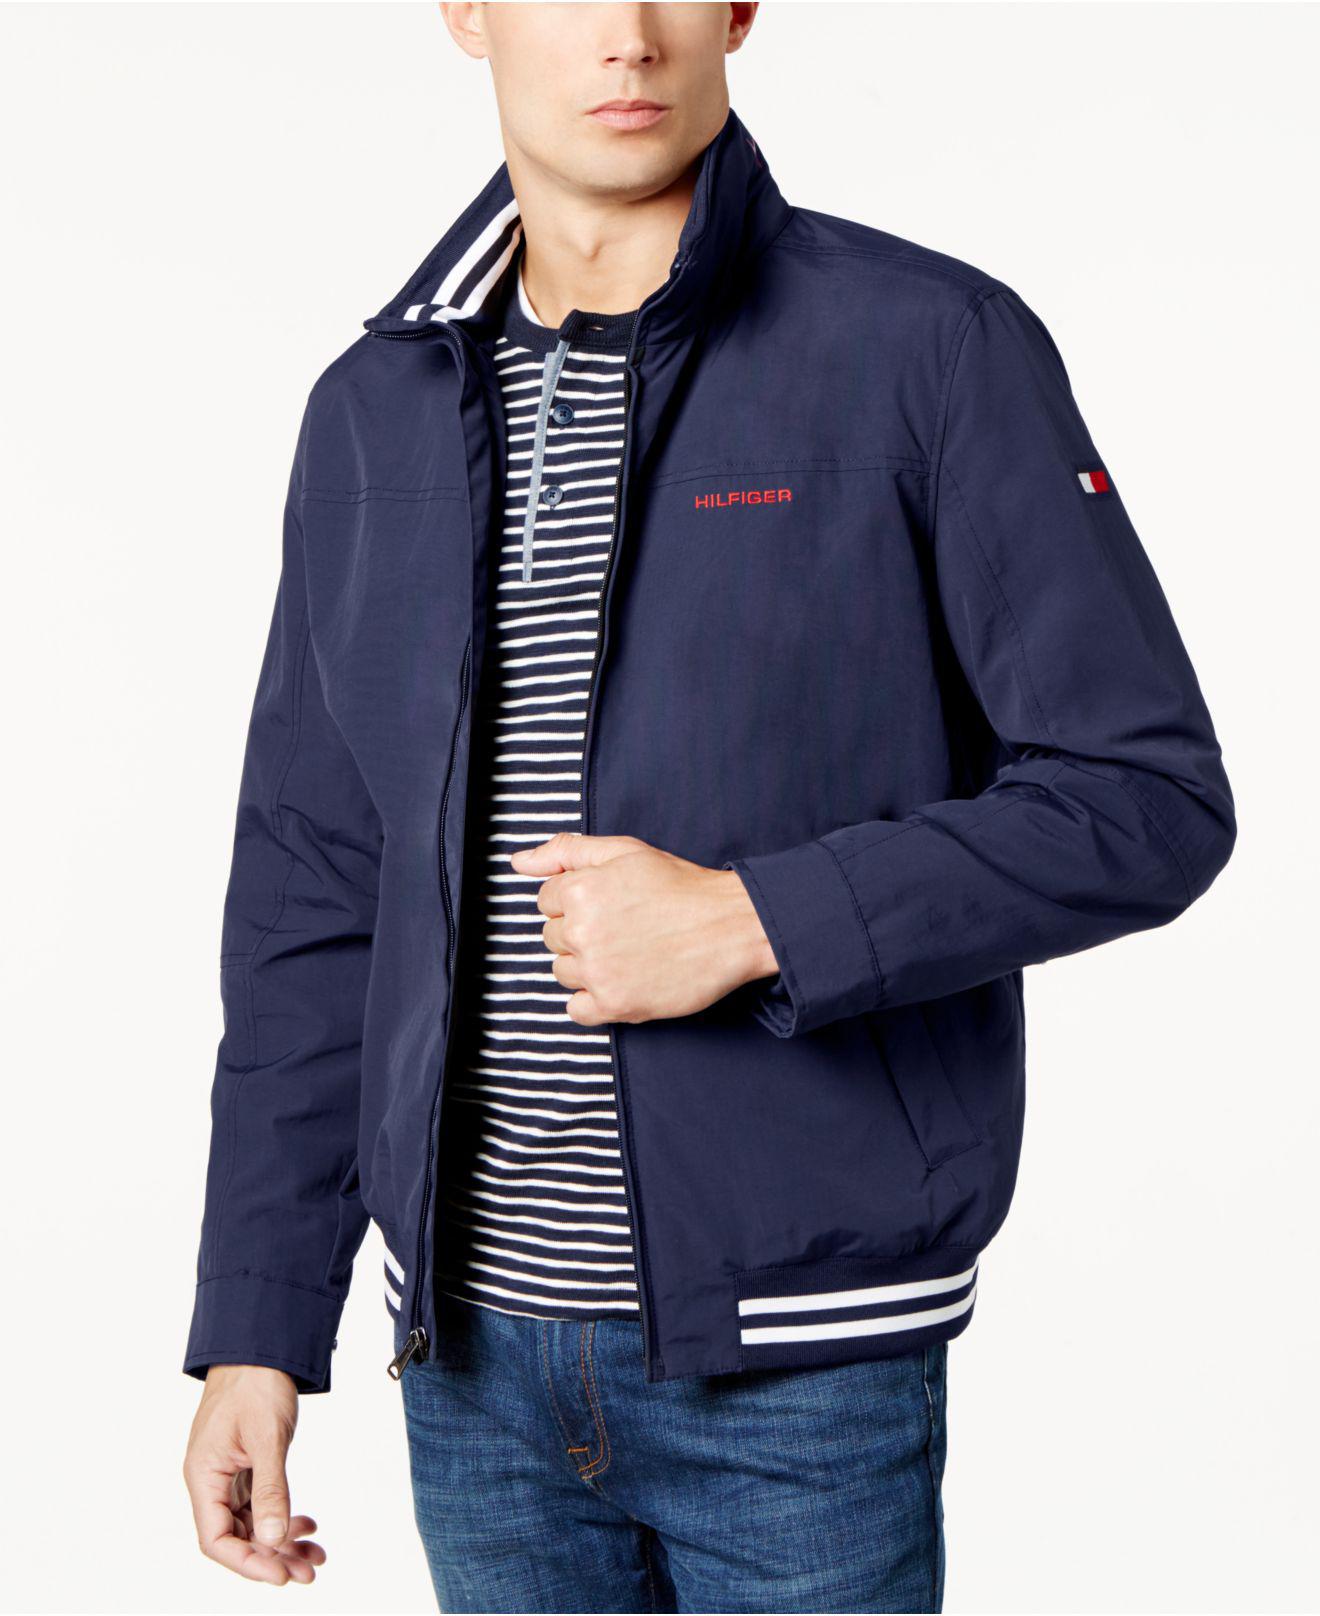 Lyst - Tommy Hilfiger Regatta Jacket, Created For Macy's in Blue for ...